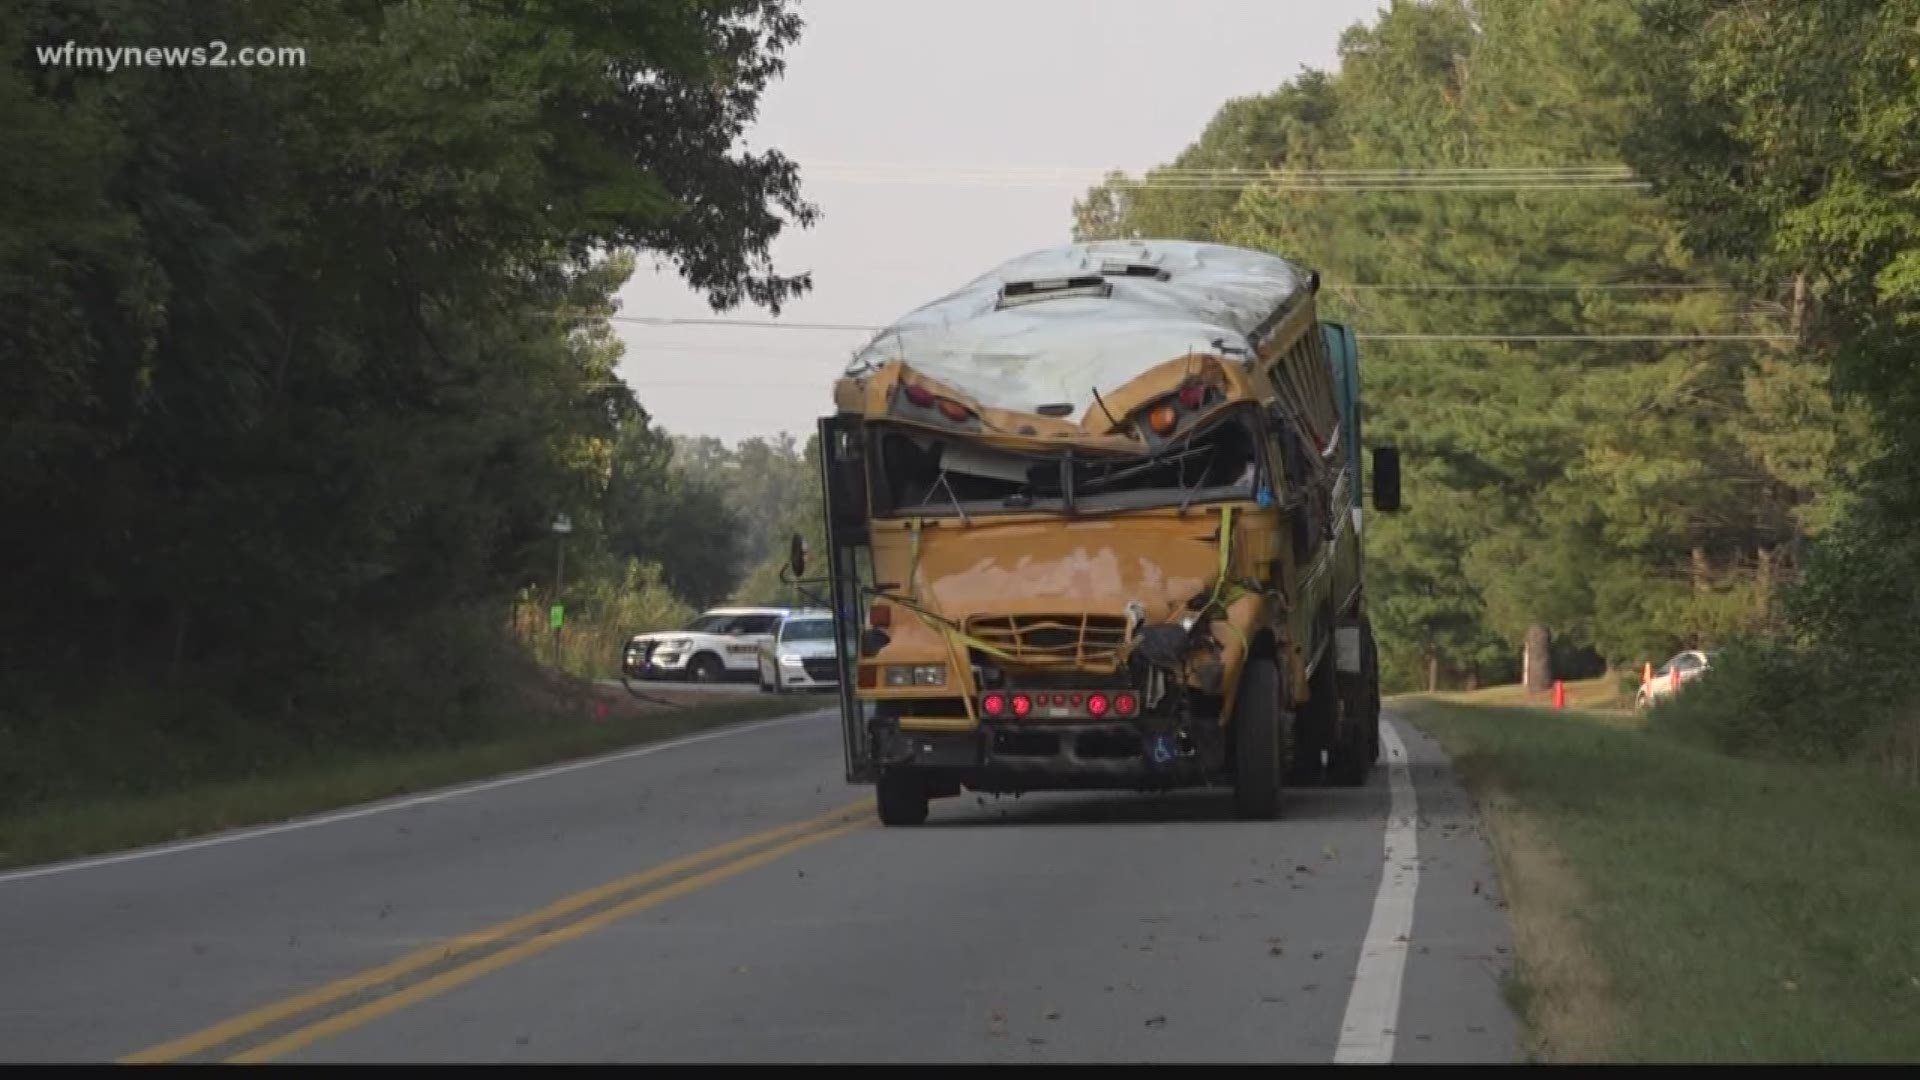 Highway Patrol said the truck driver crossed the center line and hit the bus. After the collision, the Rockingham County bus flipped down and embankment.